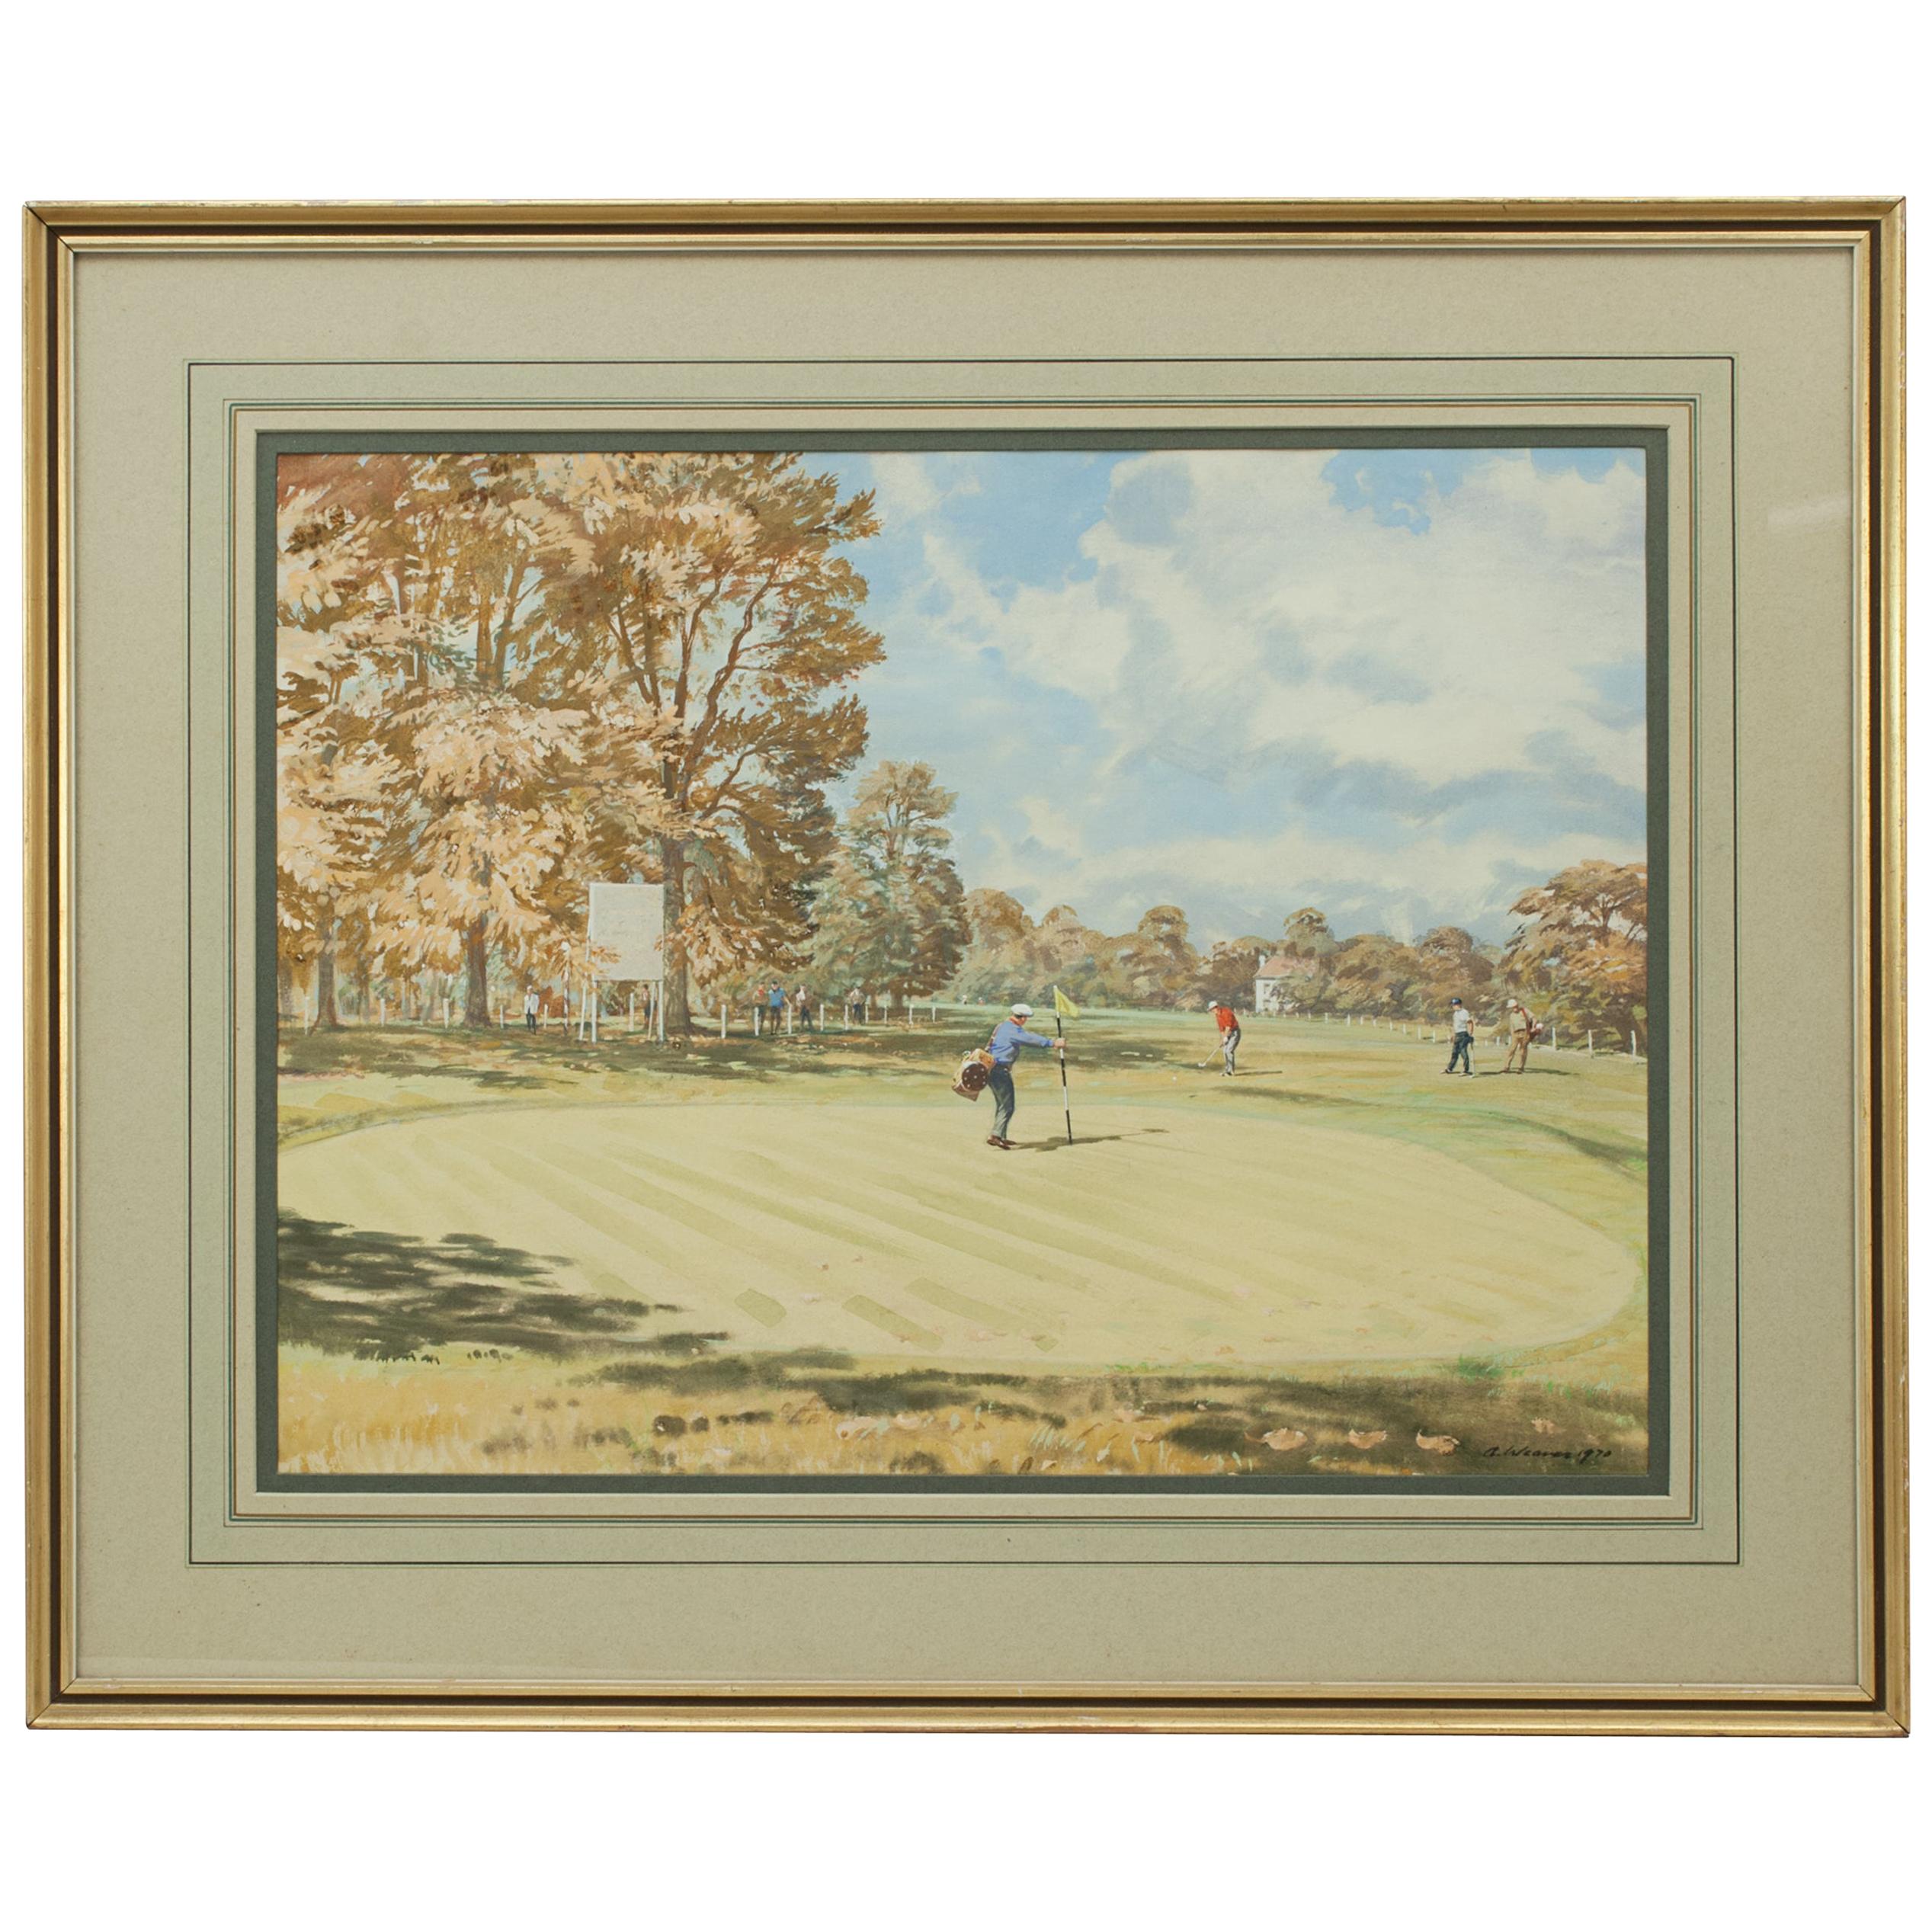 Original Golf Watercolour, Wentworth West Course, 18th Green by Arthur Weaver